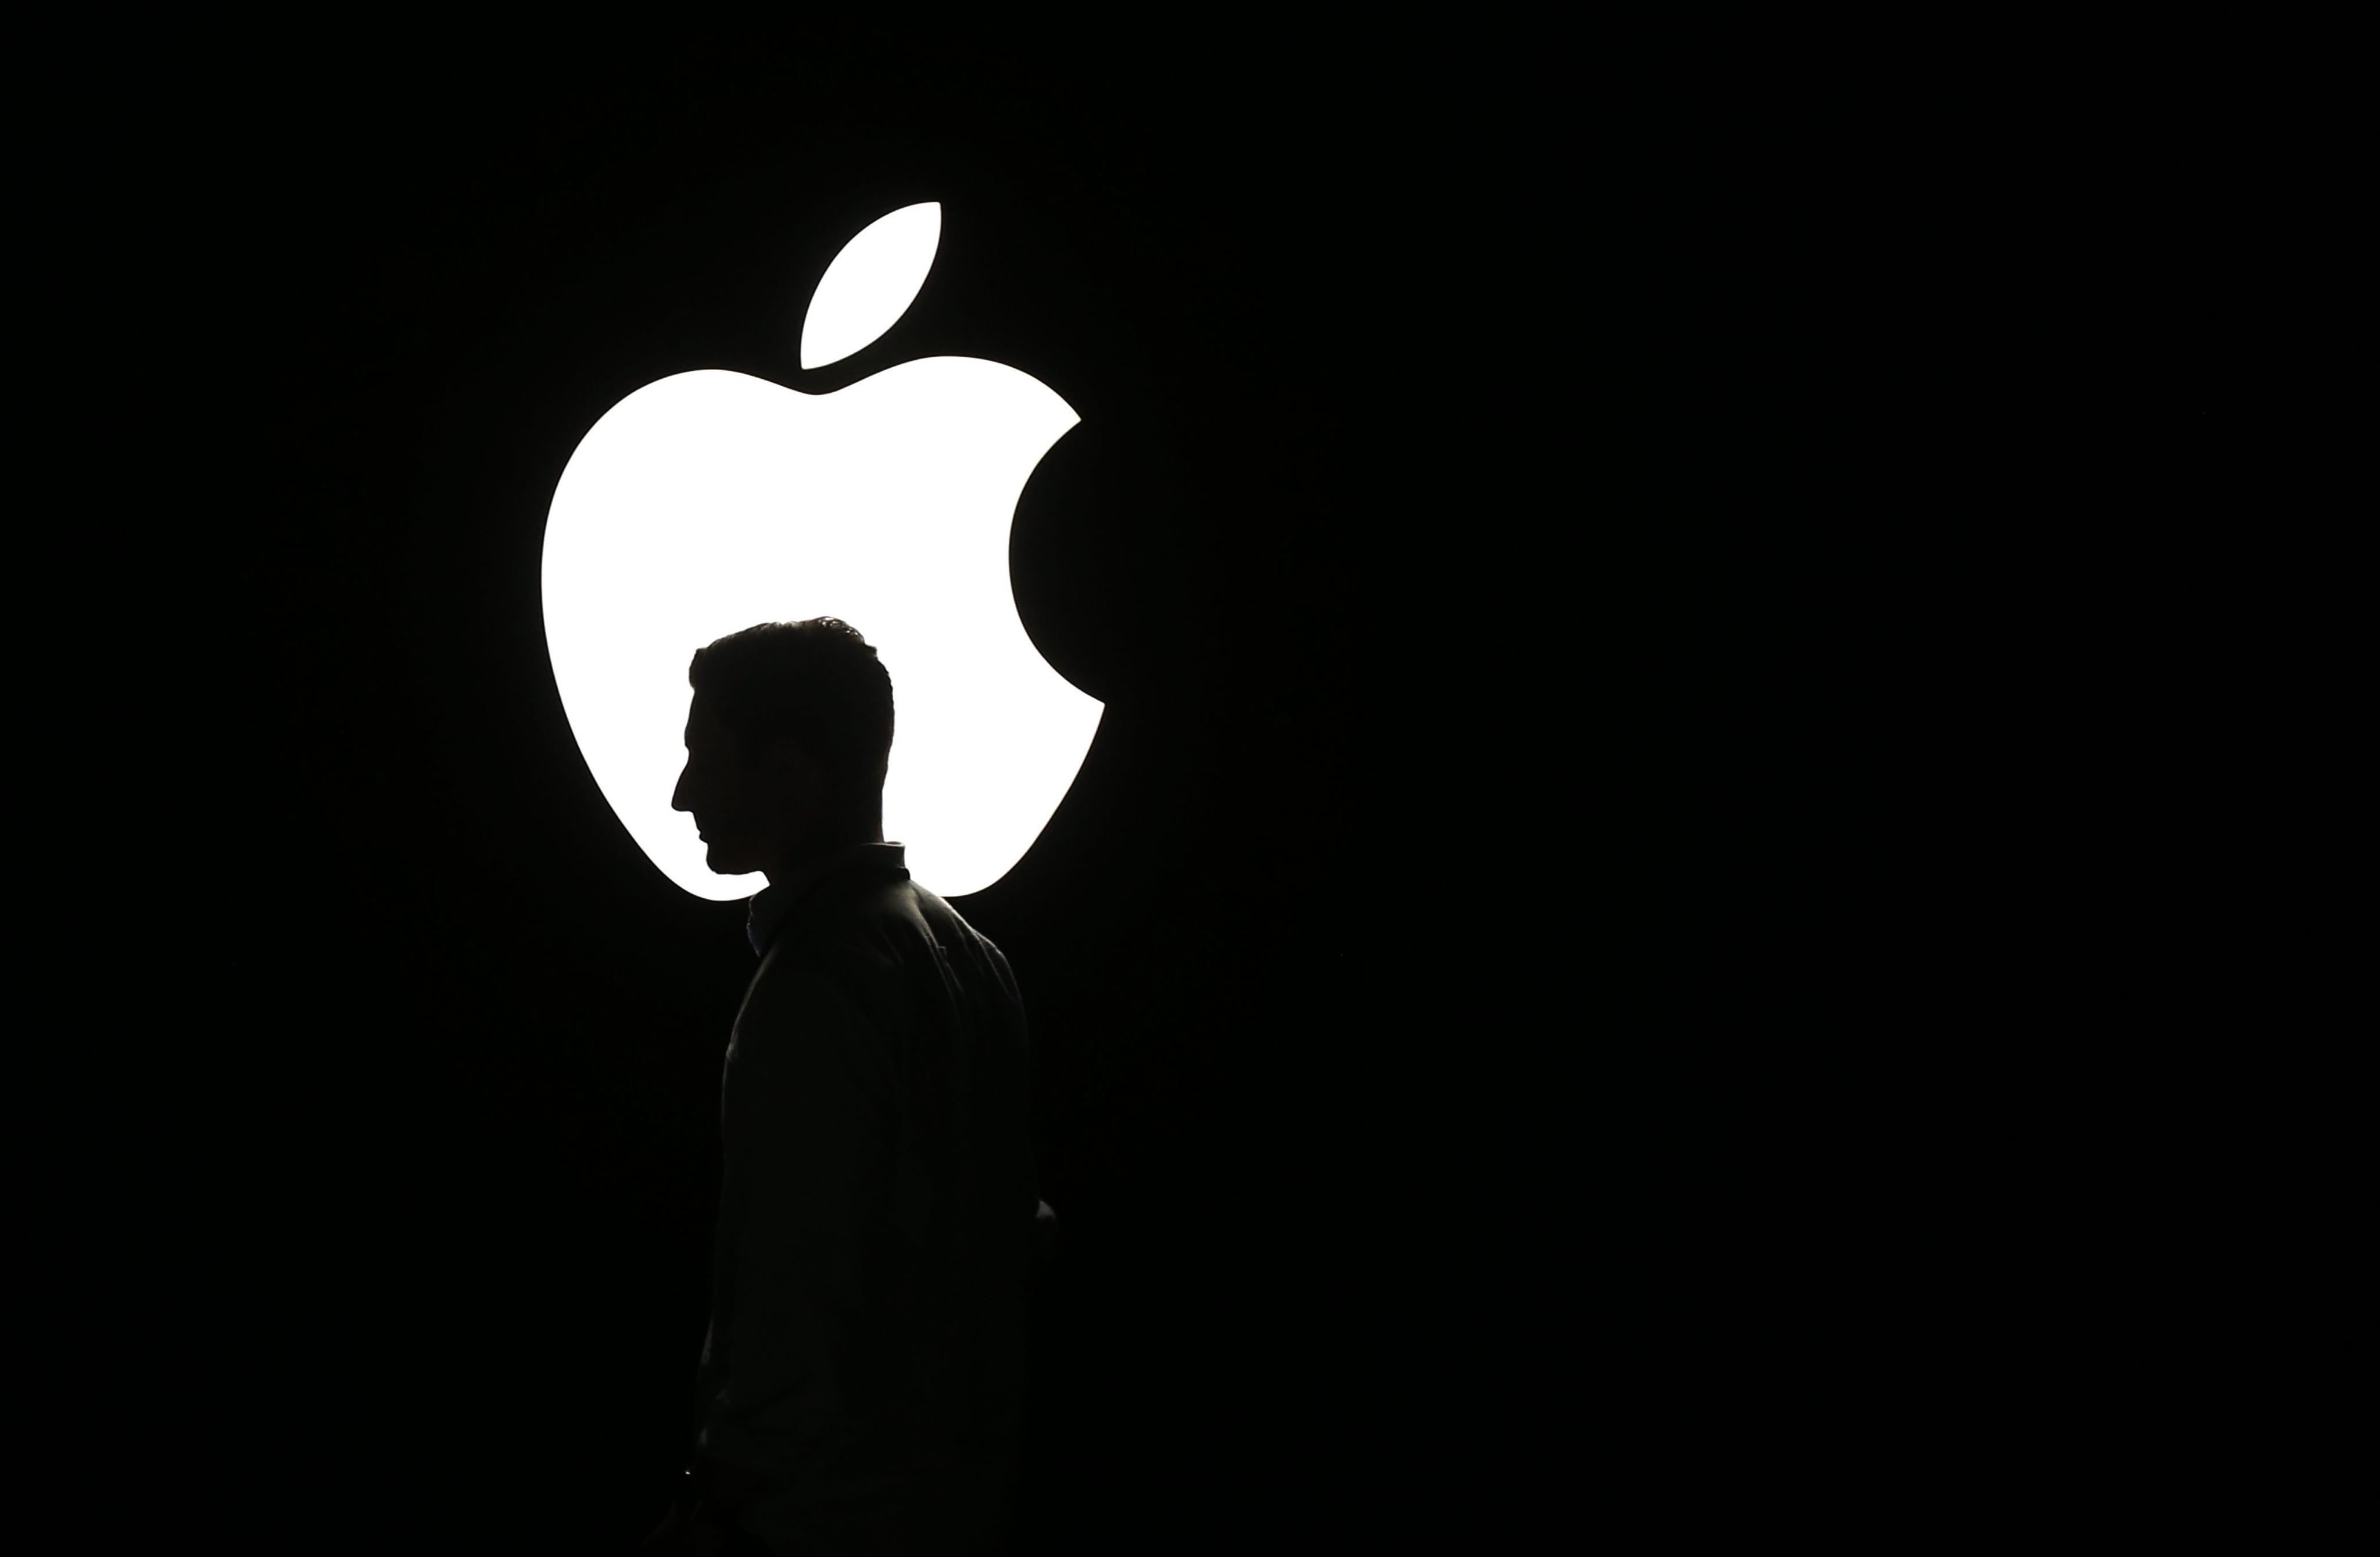 A man walks in front of the Apple logo during a product announcement event from the Bill Graham Civic Auditorium in San Francisco, Sept. 9, 2015. (Monica Davey—EPA)